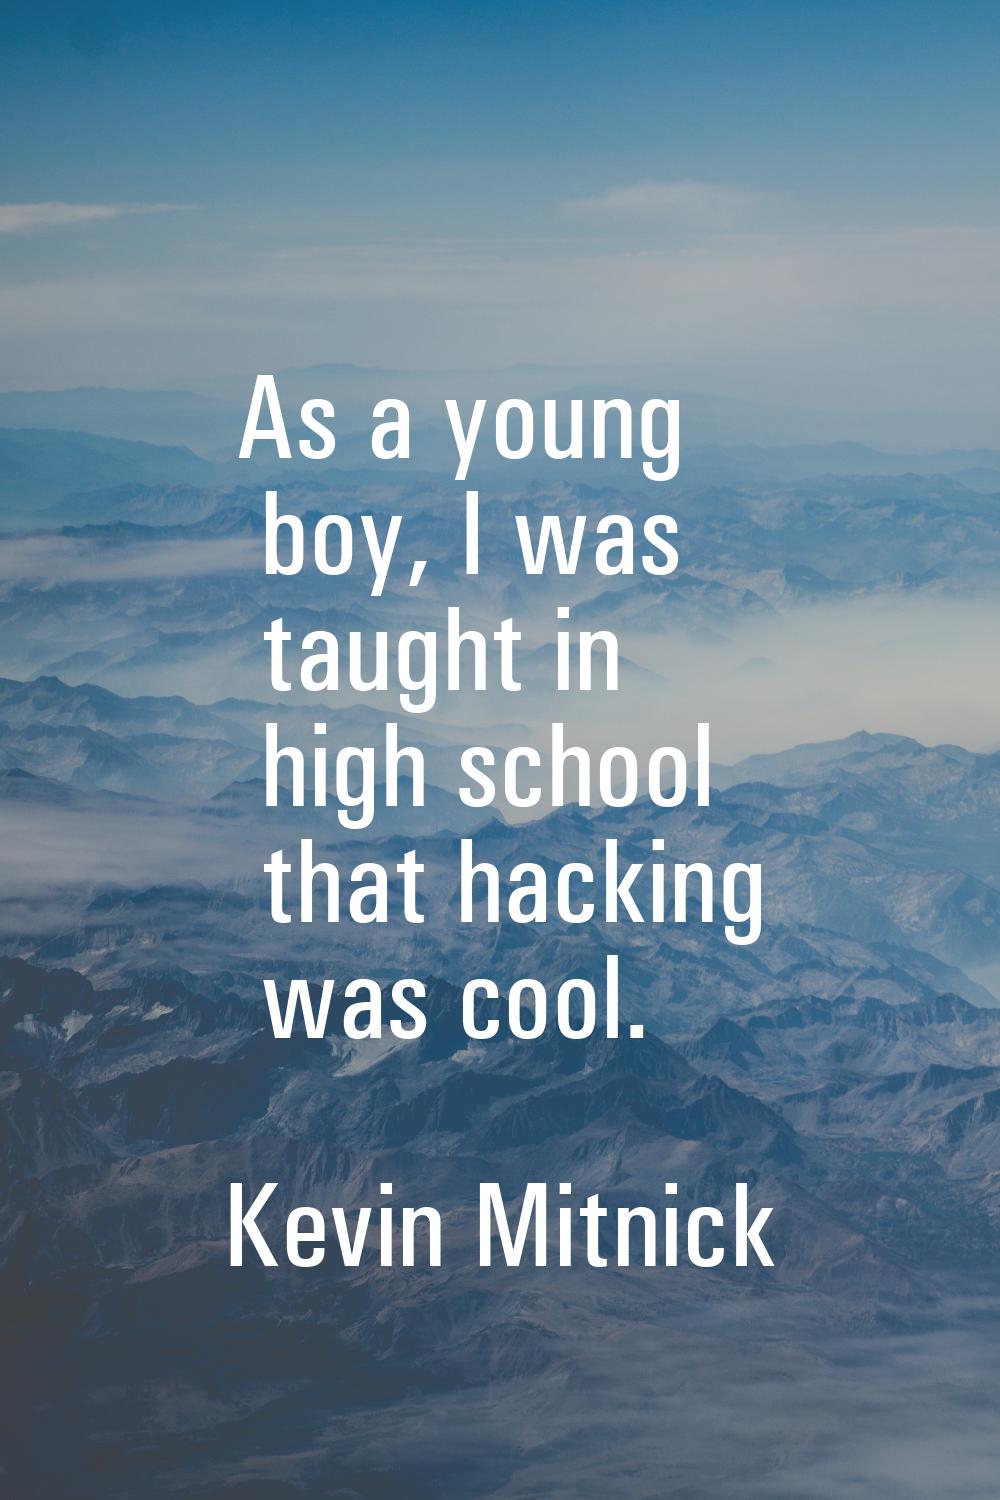 As a young boy, I was taught in high school that hacking was cool.